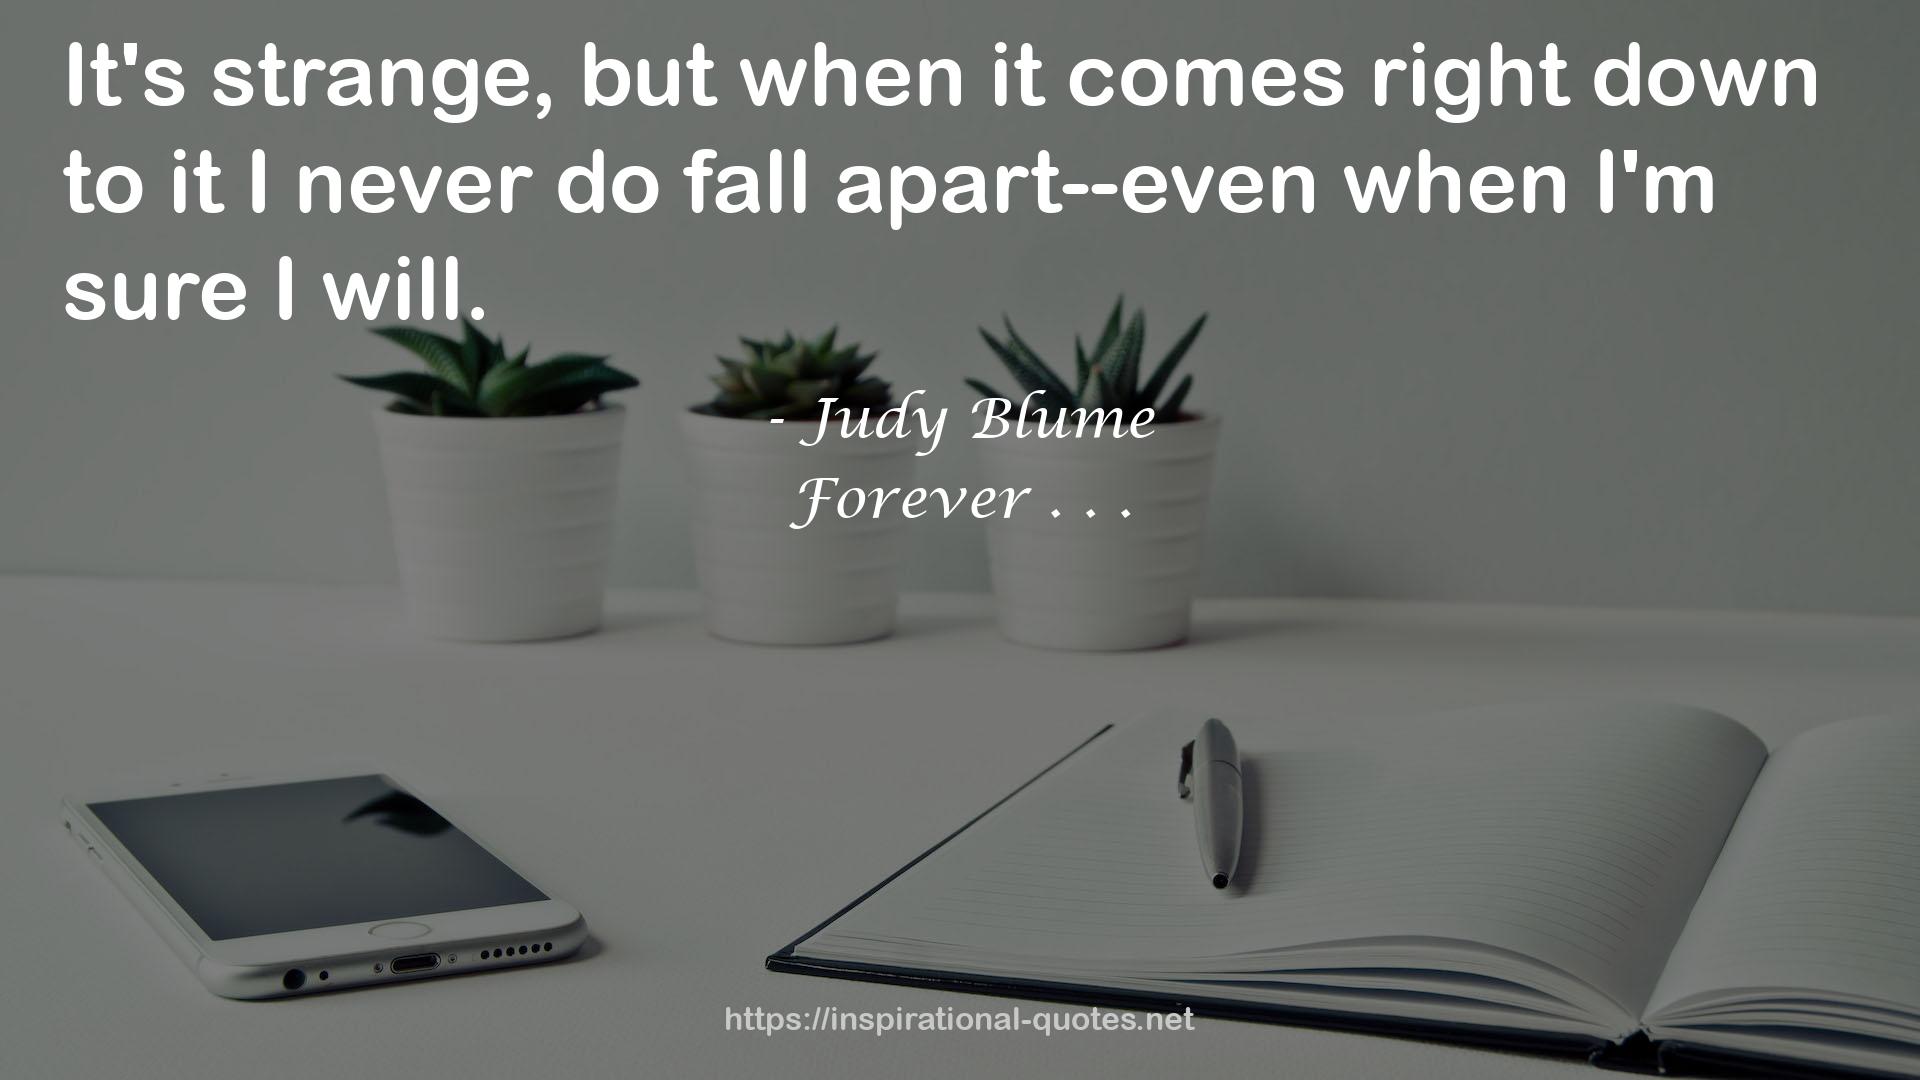 Judy Blume QUOTES